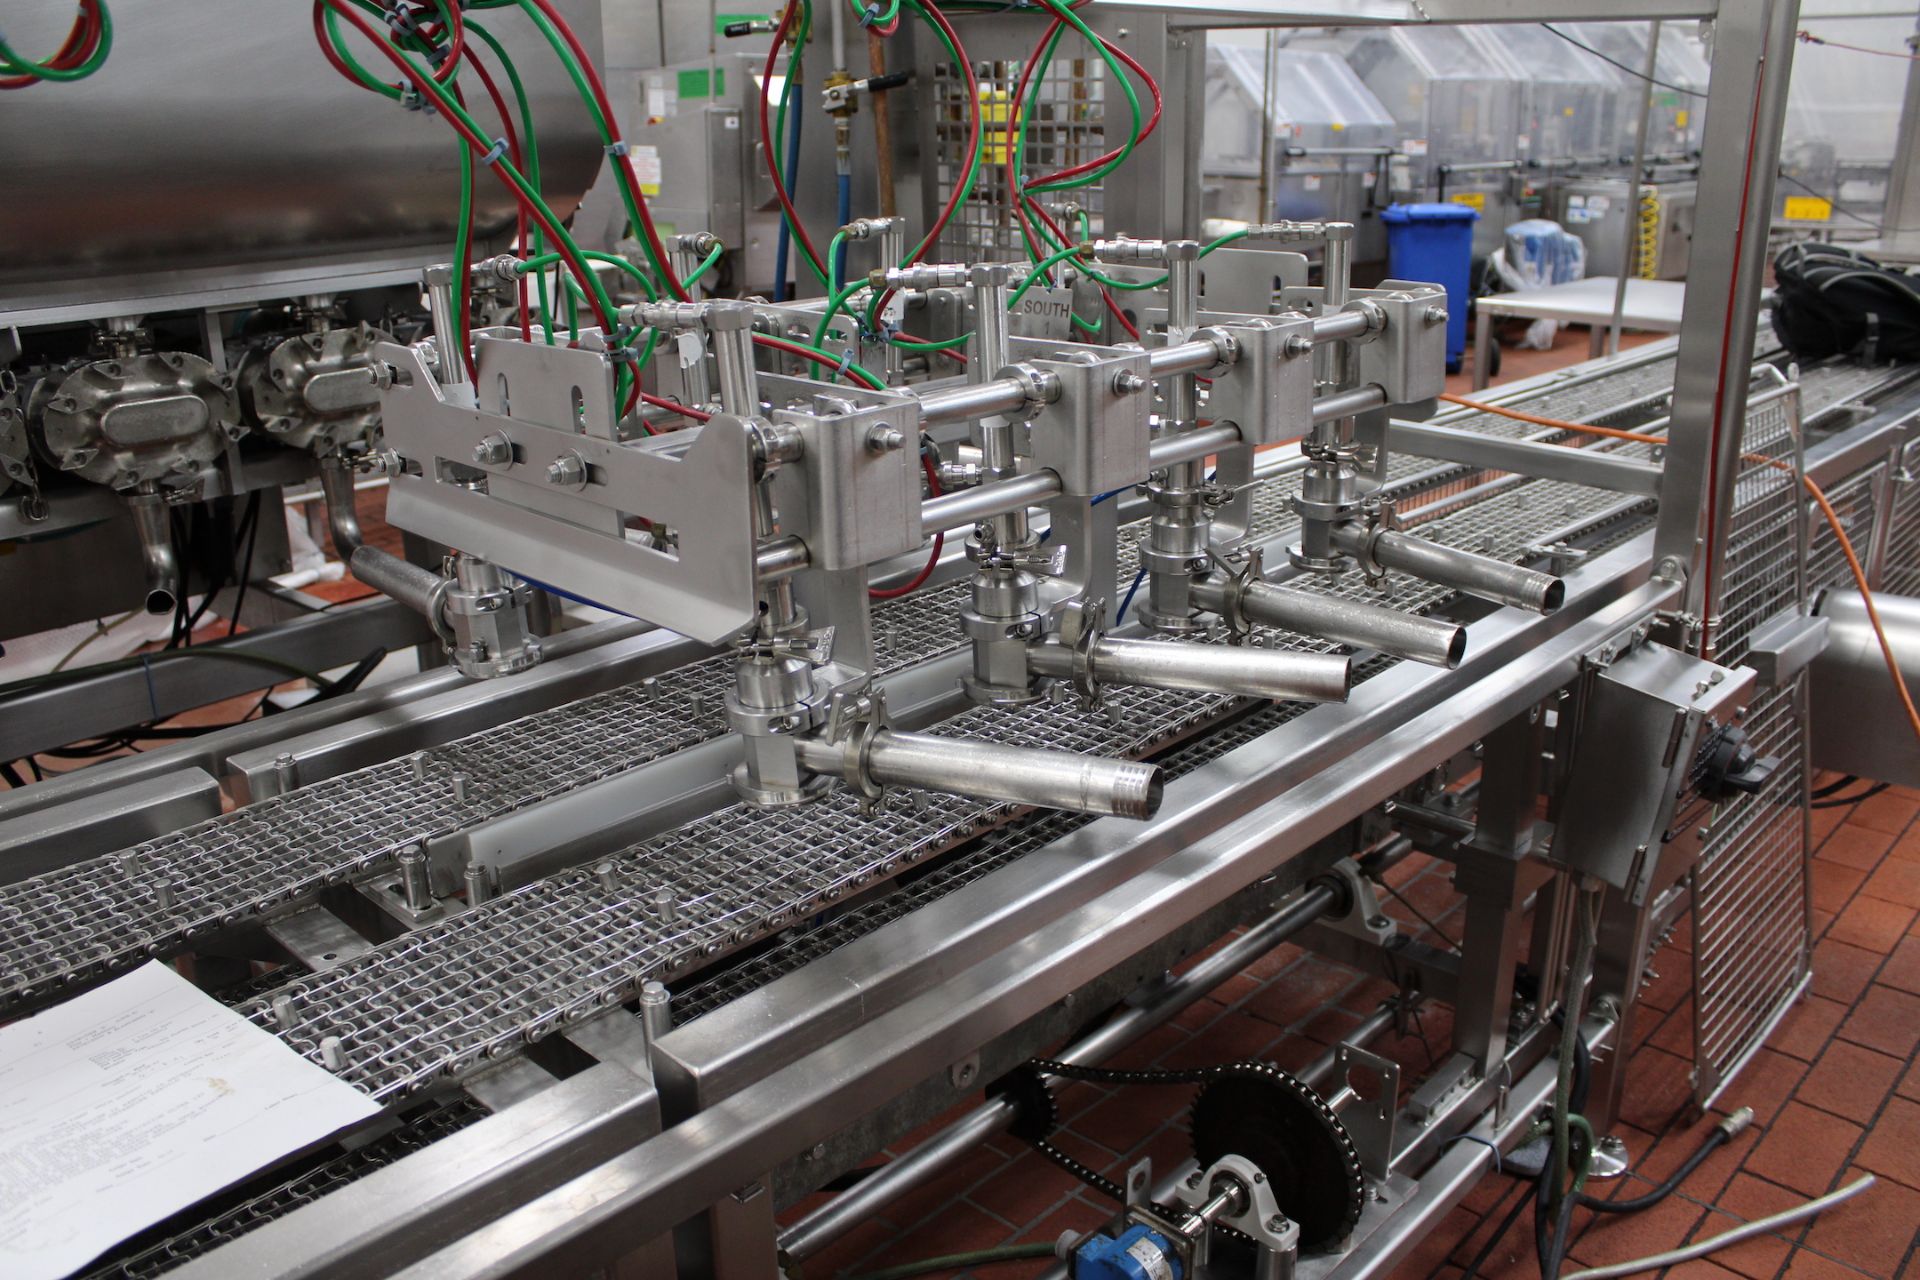 HINDSBOCK 4-WIDE SAUCE APPLICATOR / FILLER, EQUIPPED WITH SERVO DRIVEN AMPCO AND WAUKESHA CHERRY - Image 11 of 11